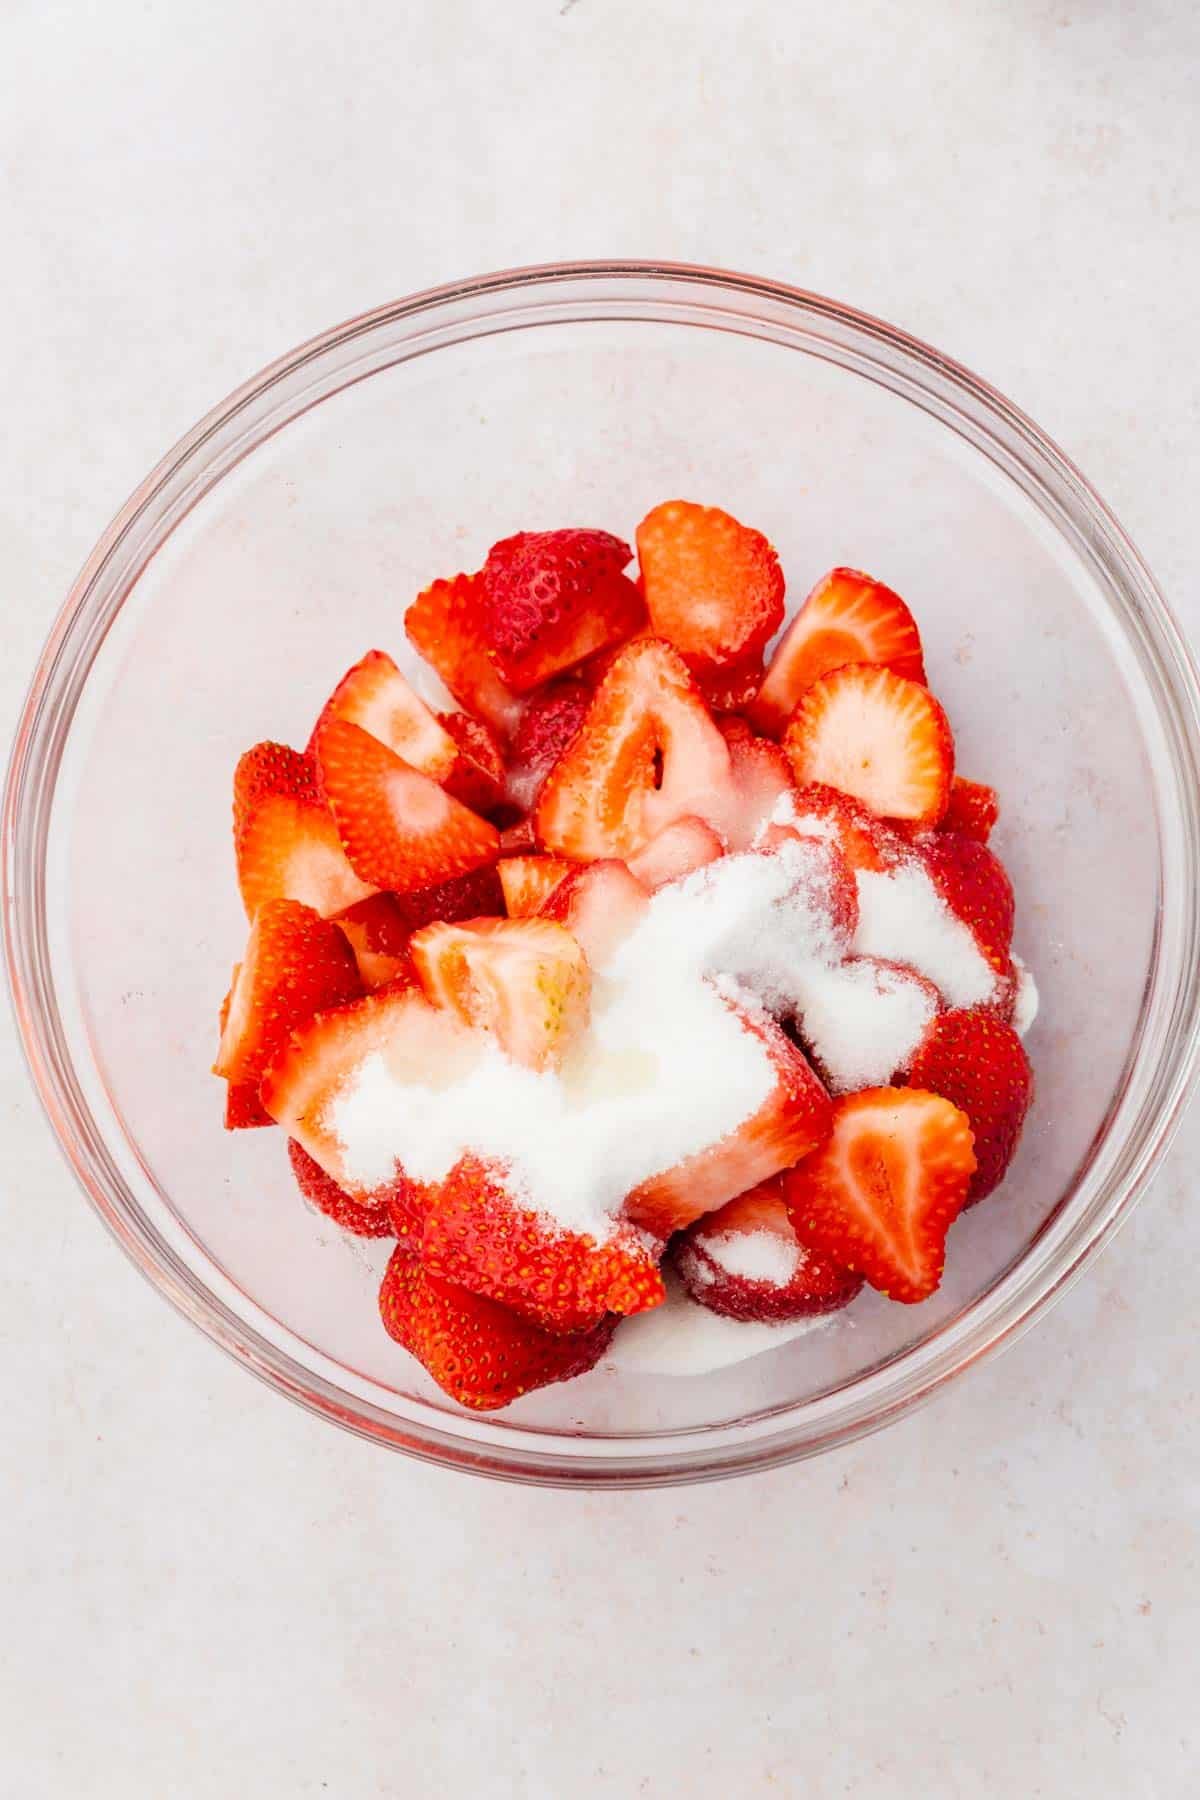 A glass mixing bowl of sliced strawberries, granulated sugar and lemon juice that have not yet been mixed.